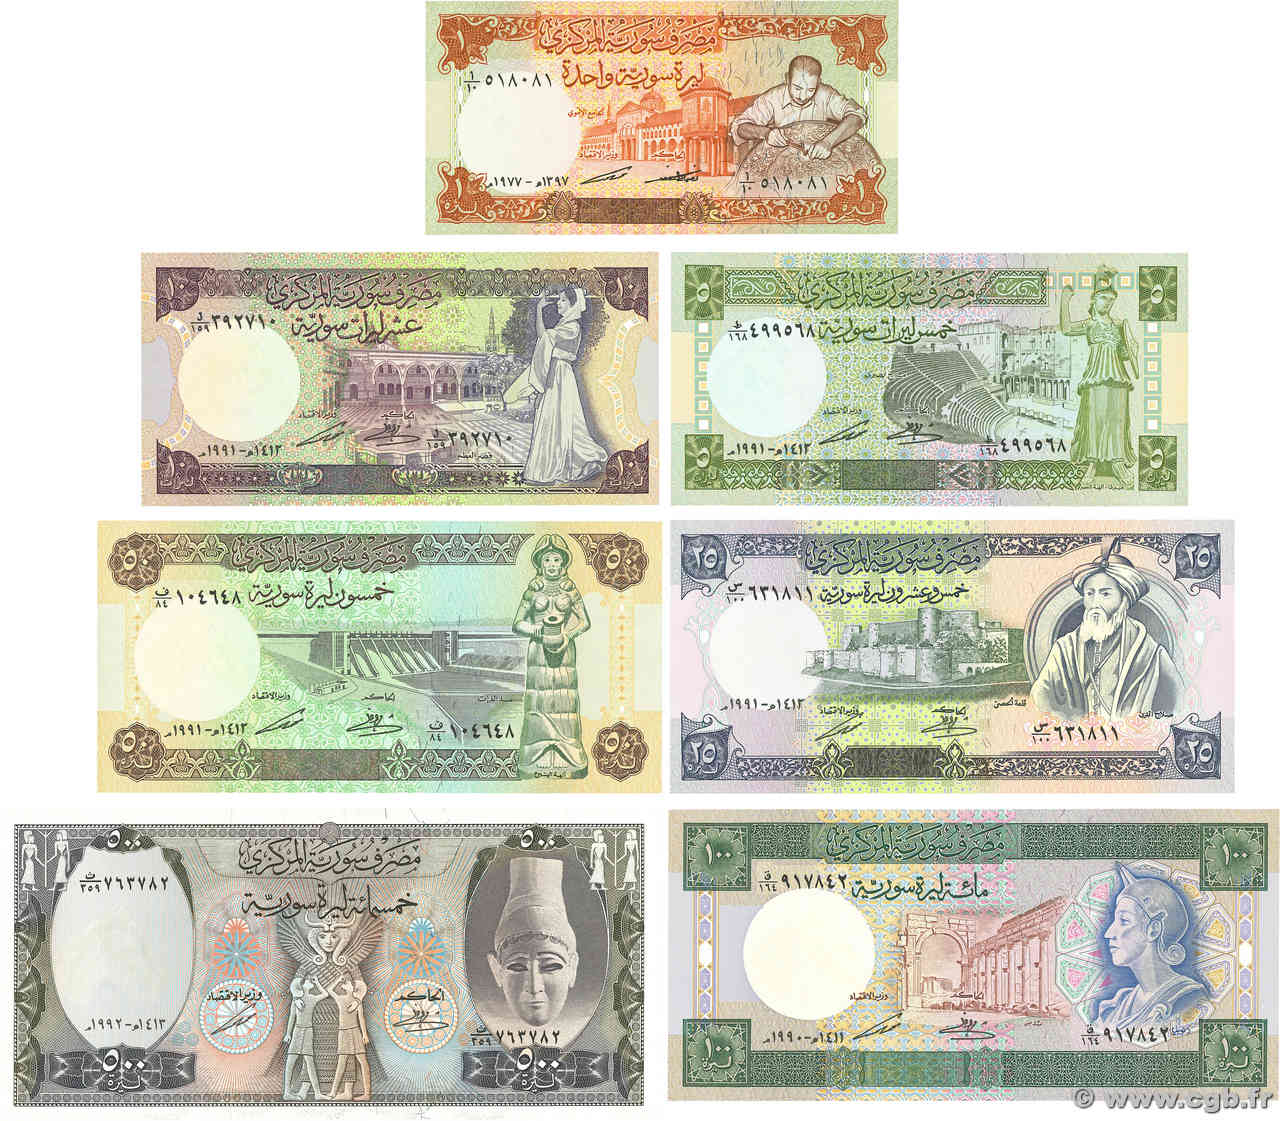 1 à 500 Pounds Lot SIRIA  1990 P.099, P.100e, P.101e, P.102e, P.103e, P.104d, P.105f	
 q.FDC